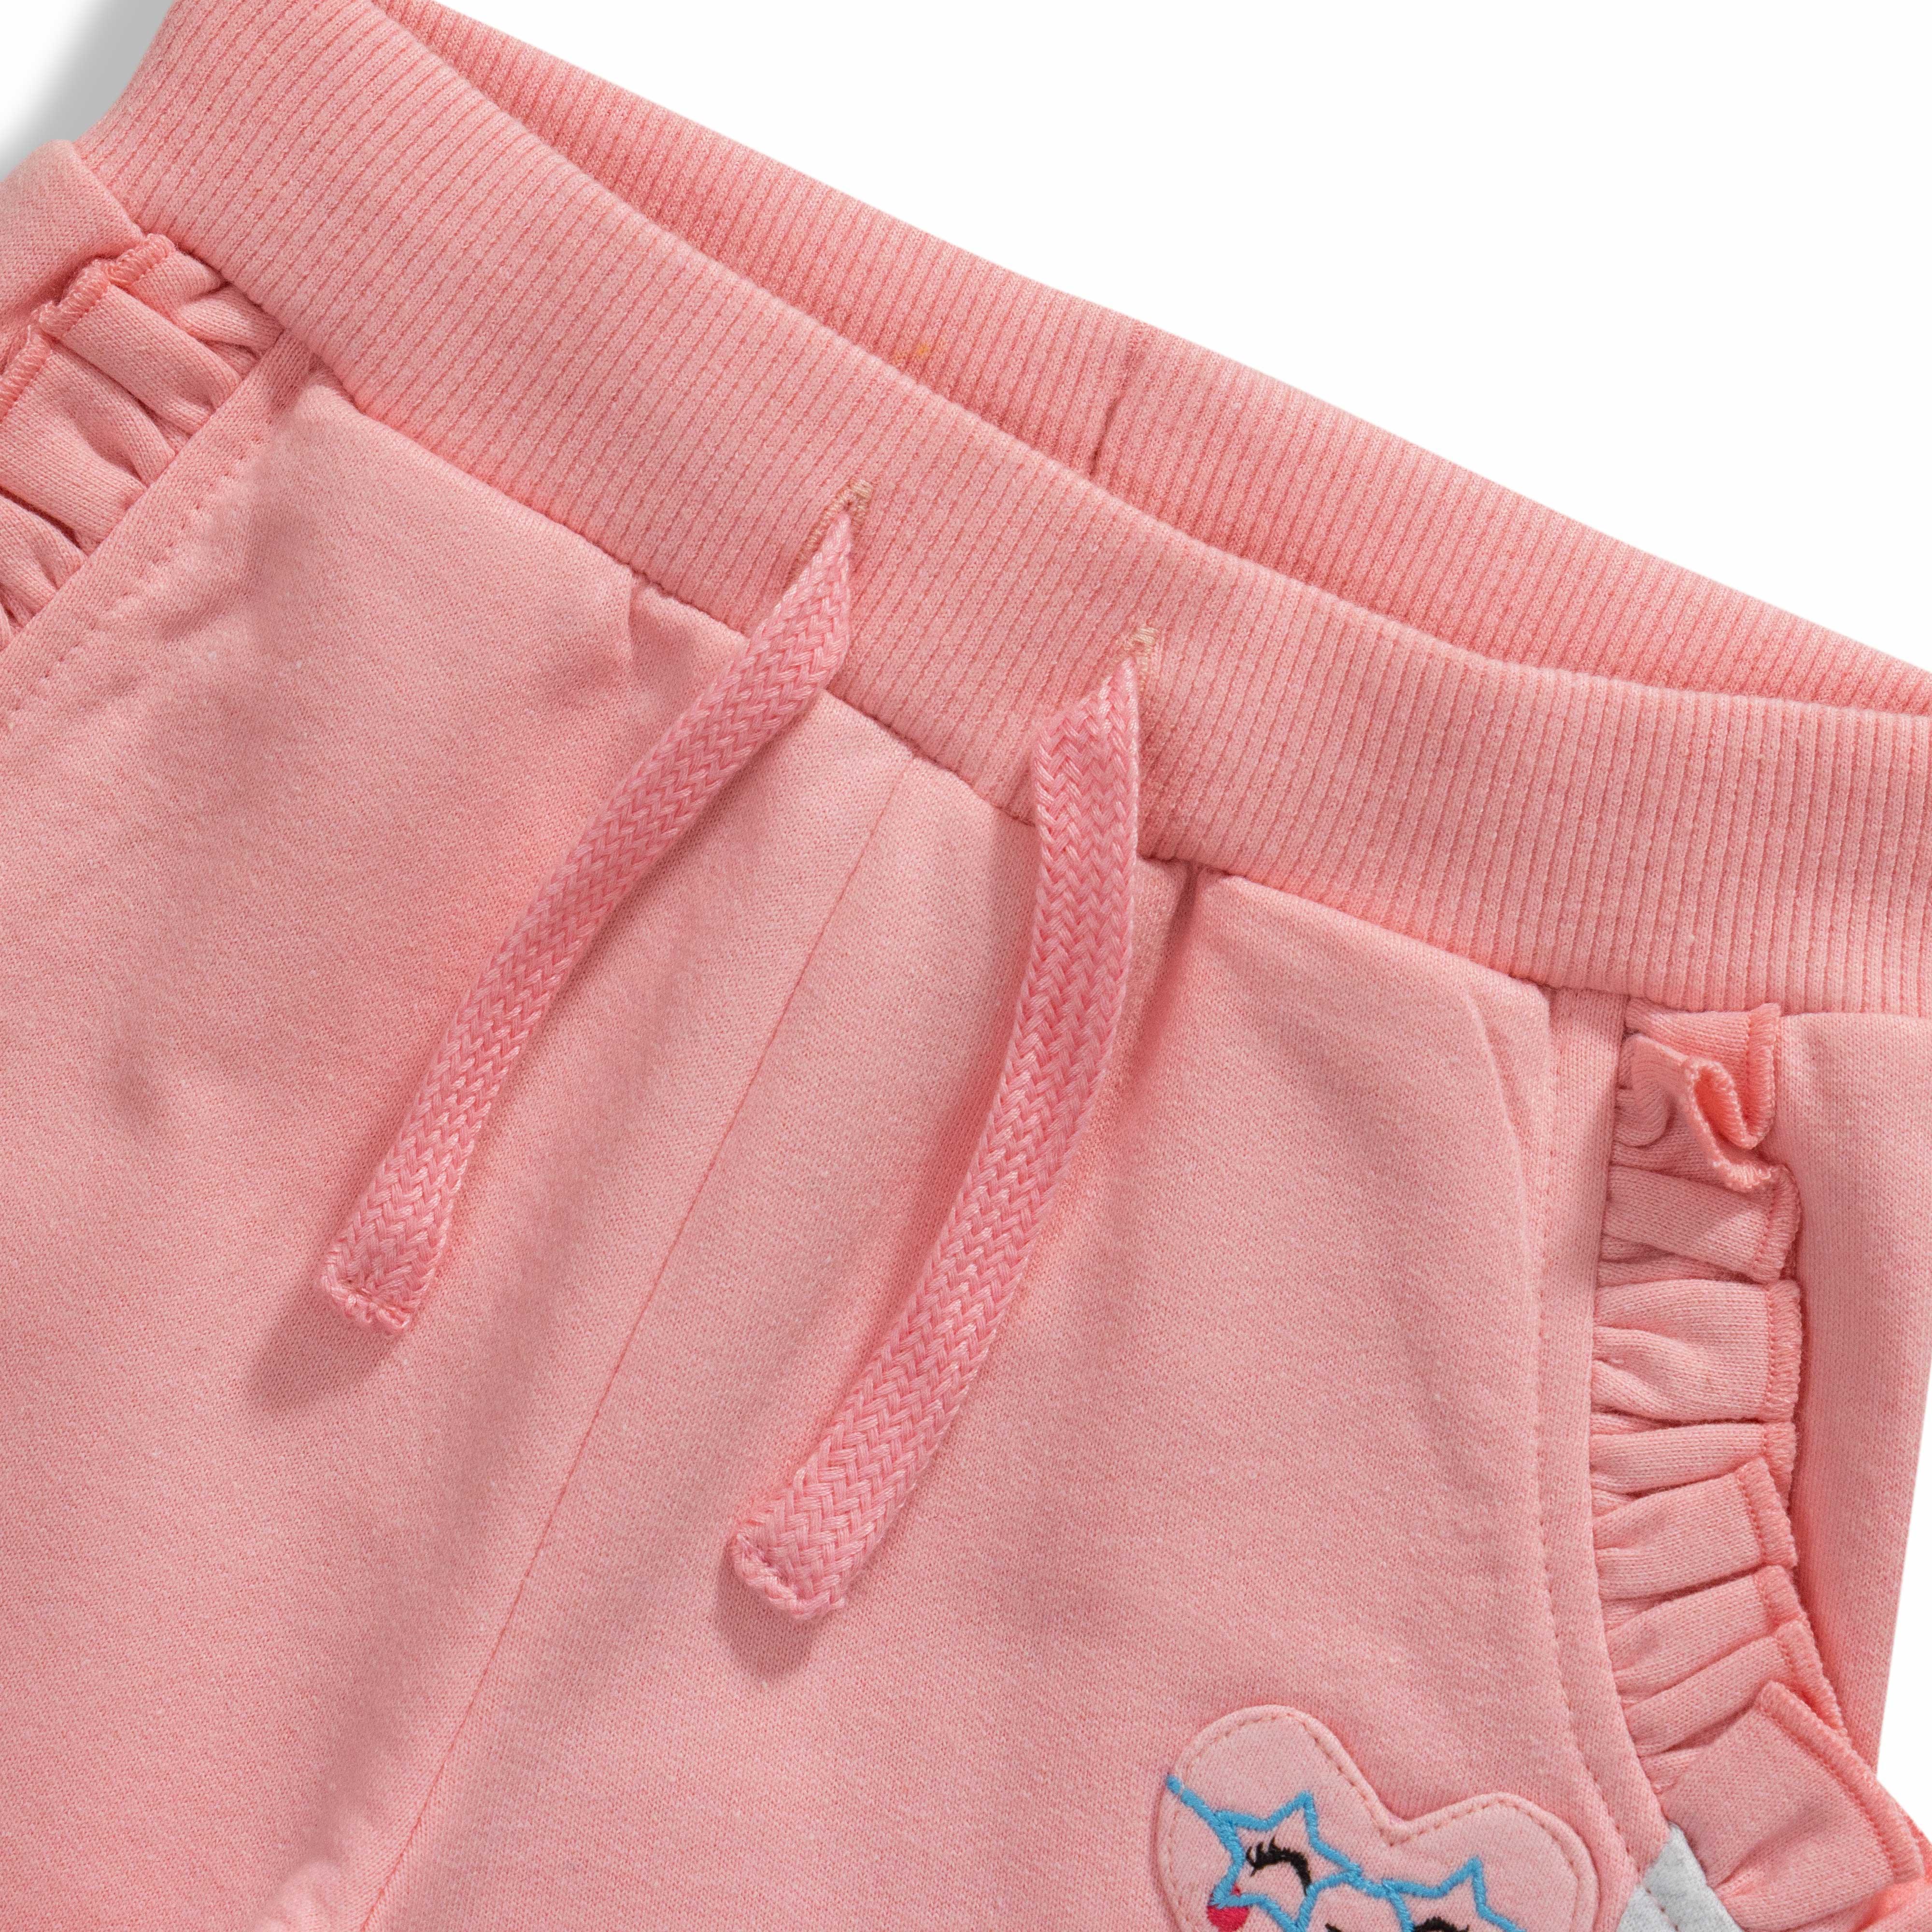 Baby Girls Solid Jogger - Juscubs